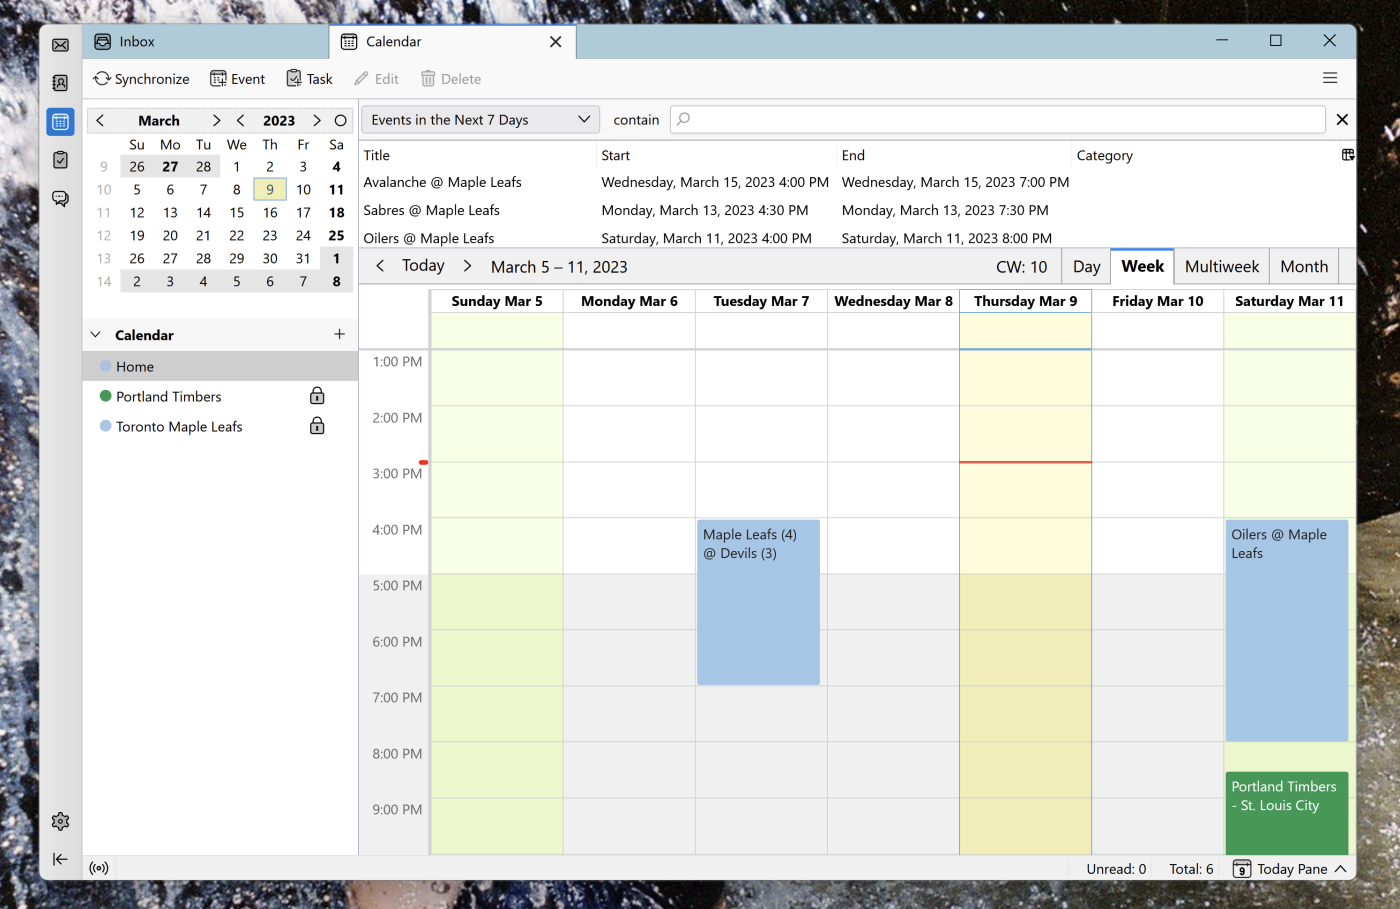 Mozilla Thunderbird, our pick for the best open source calendar app for Windows